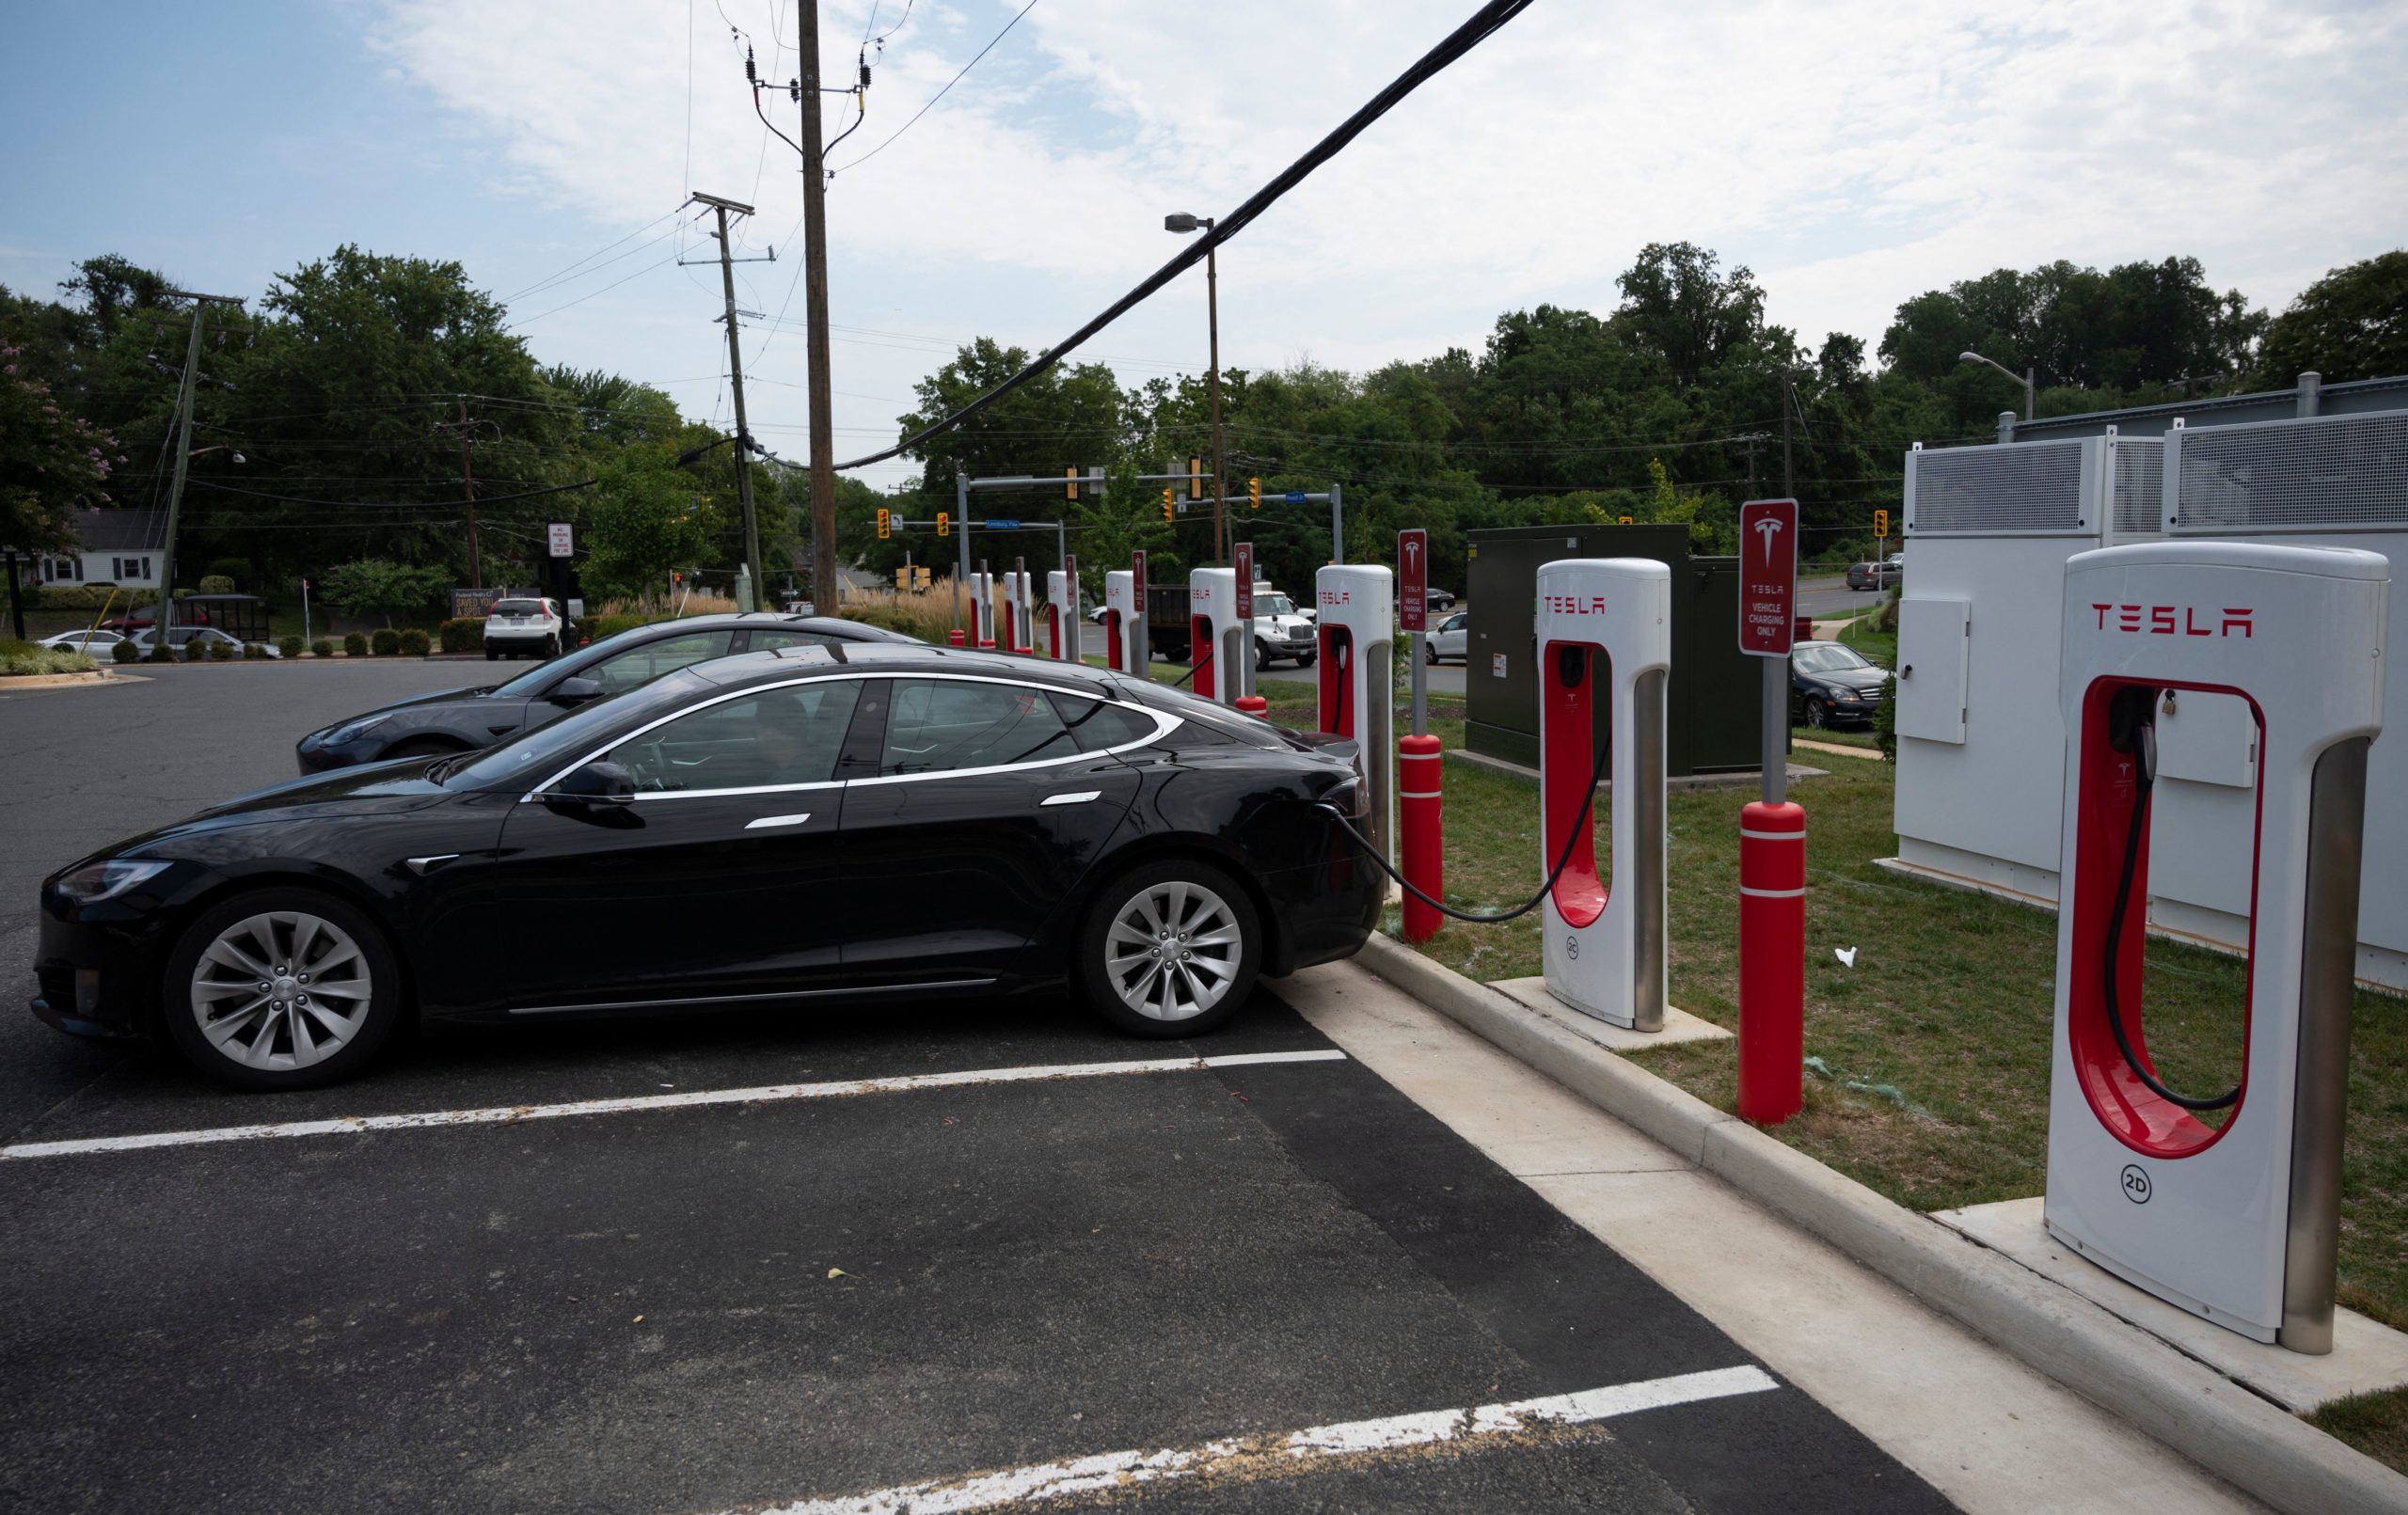 Cars charge at a Tesla super charging station in Arlington, Virginia on Aug. 13. (Andrew Caballero-Reynolds/AFP via Getty Images)